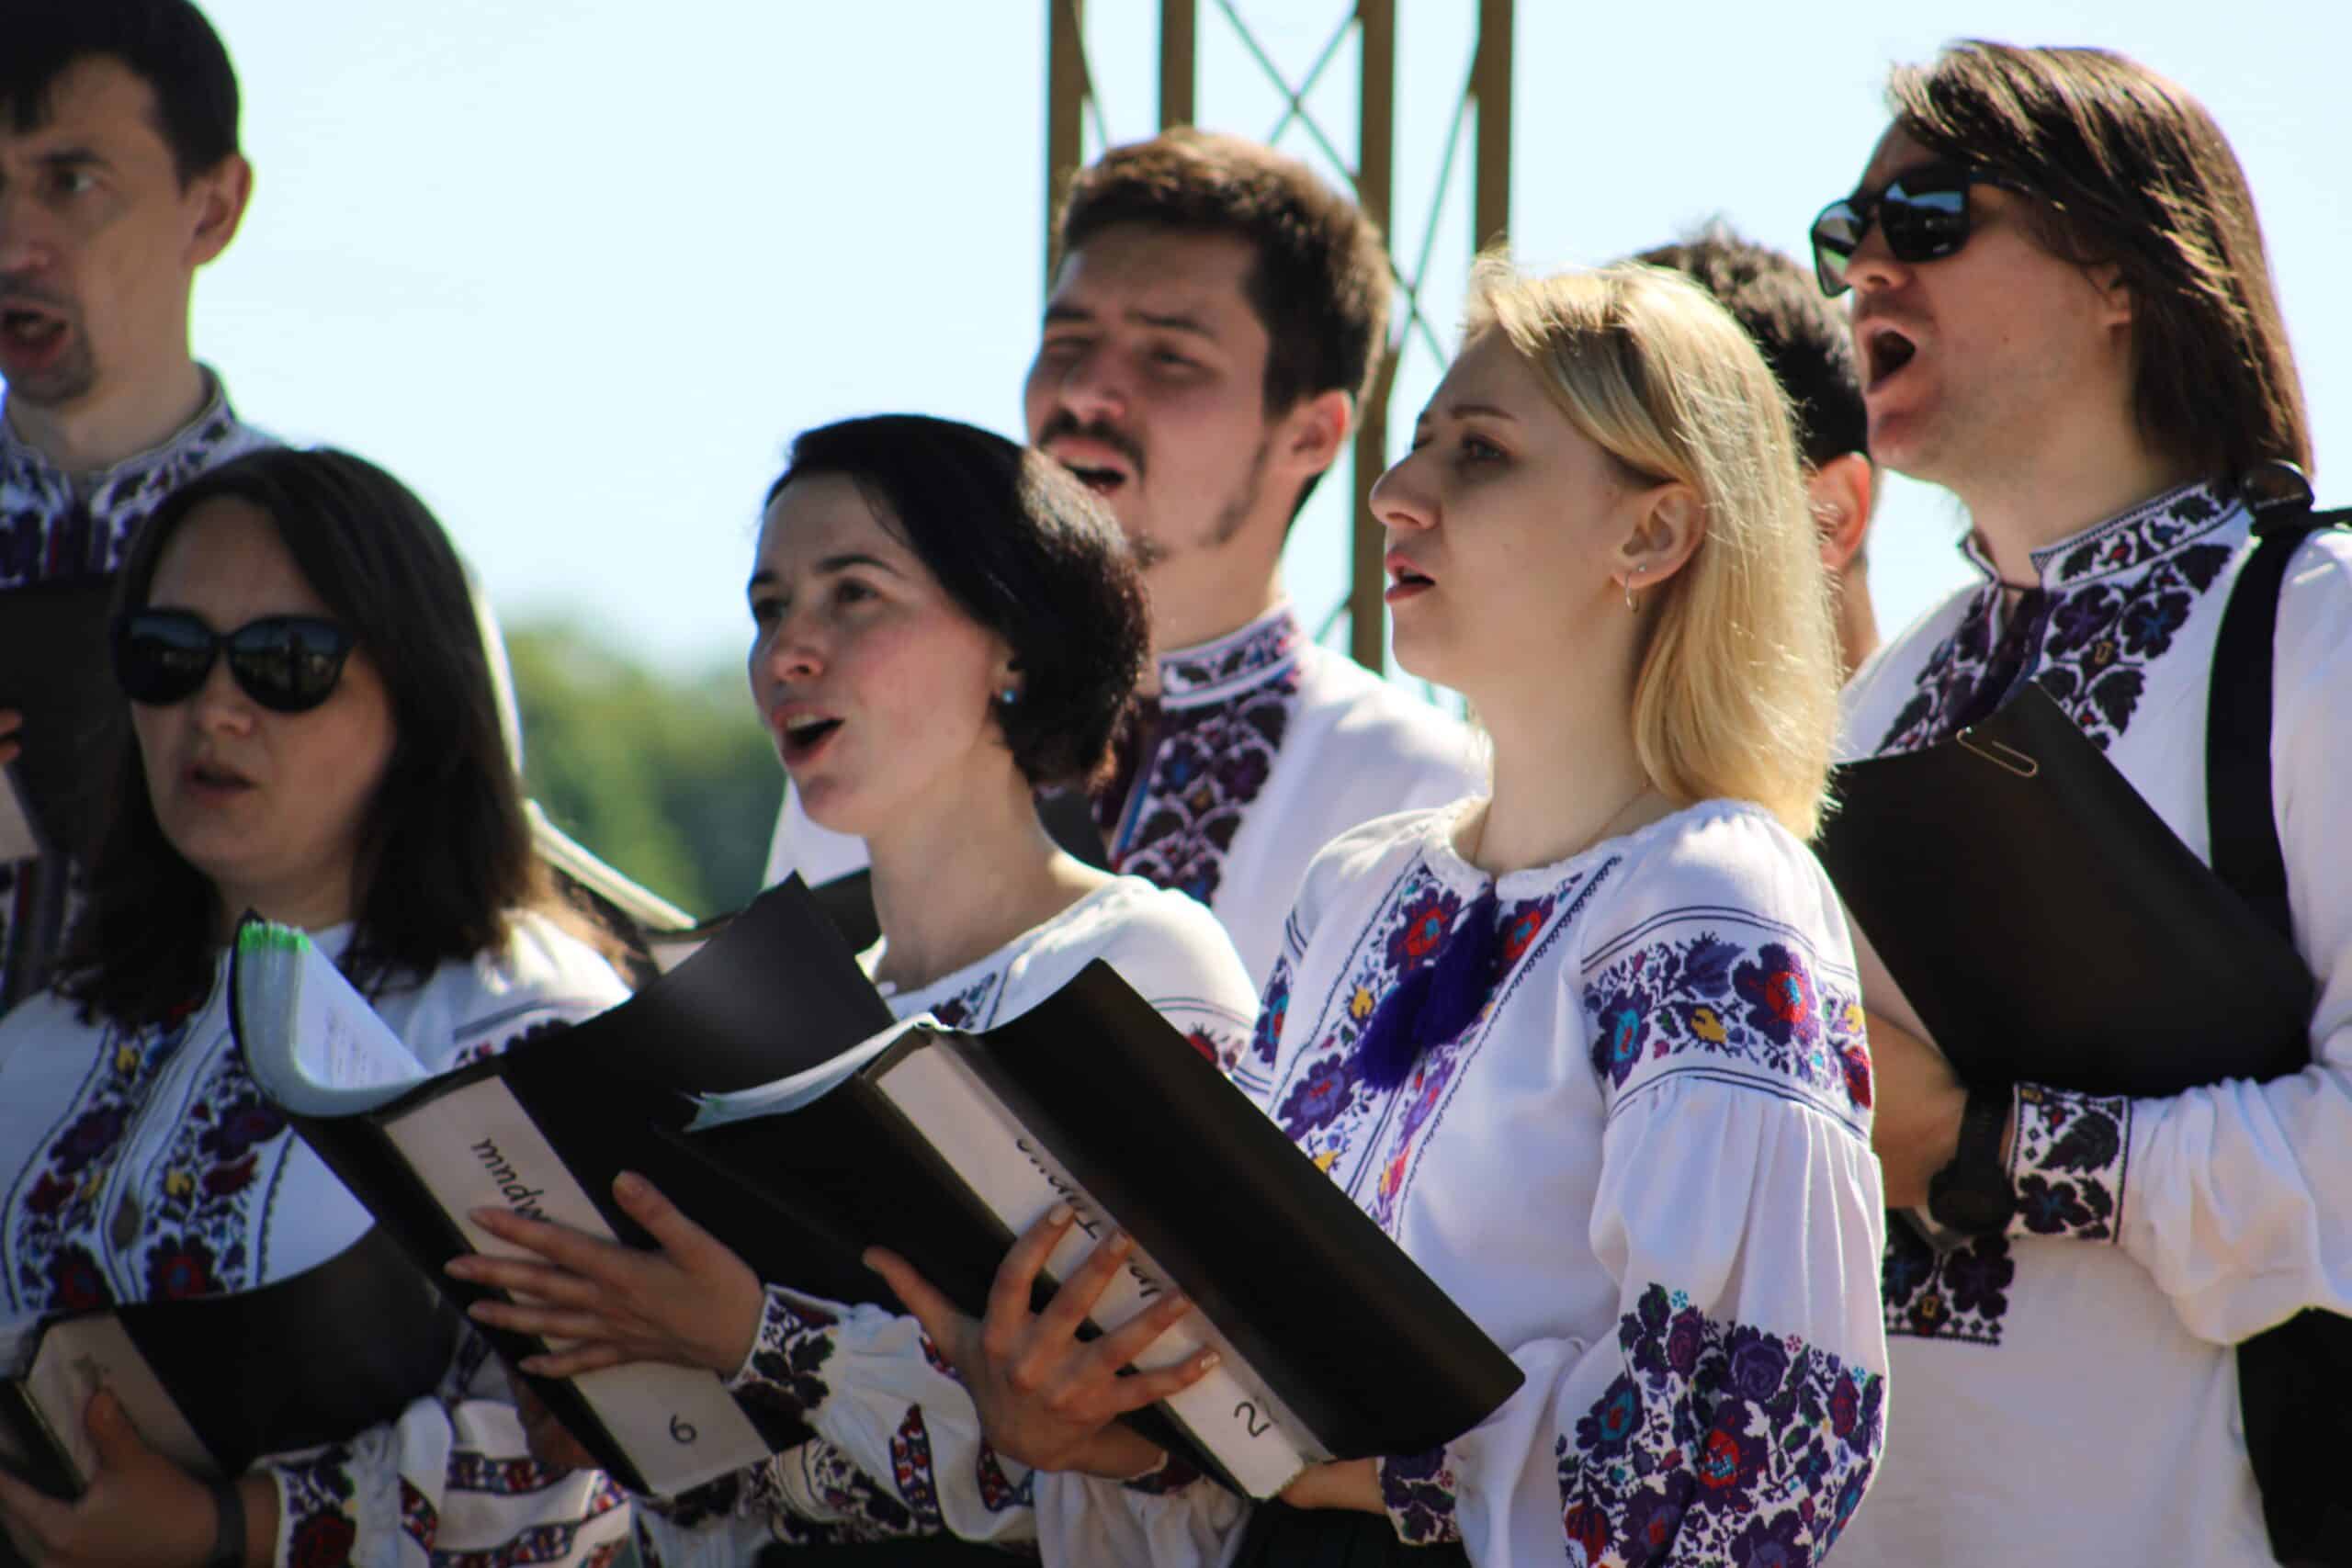 A Ukrainian Catholic choir dressed in traditional attire sings during a June 26, 2023, Divine Liturgy that drew thousands to Stradch, a Marian spiritual center in the Lviv region of Ukraine. (OSV News photo/Gina Christian)